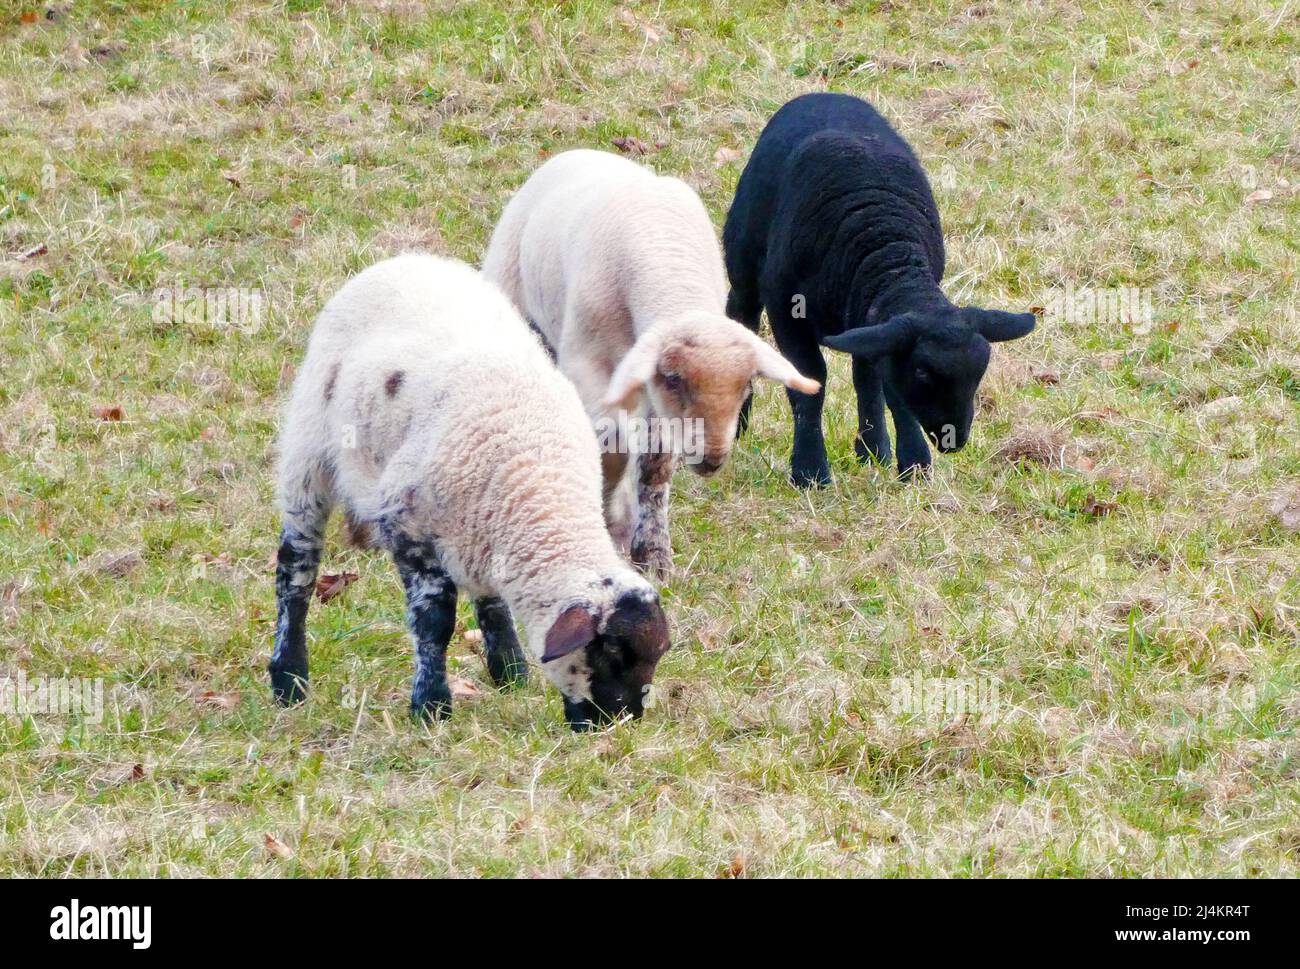 Three lambs are eating the grass. One lamb is white, another is completely black and the last one has a coat with both colors Stock Photo